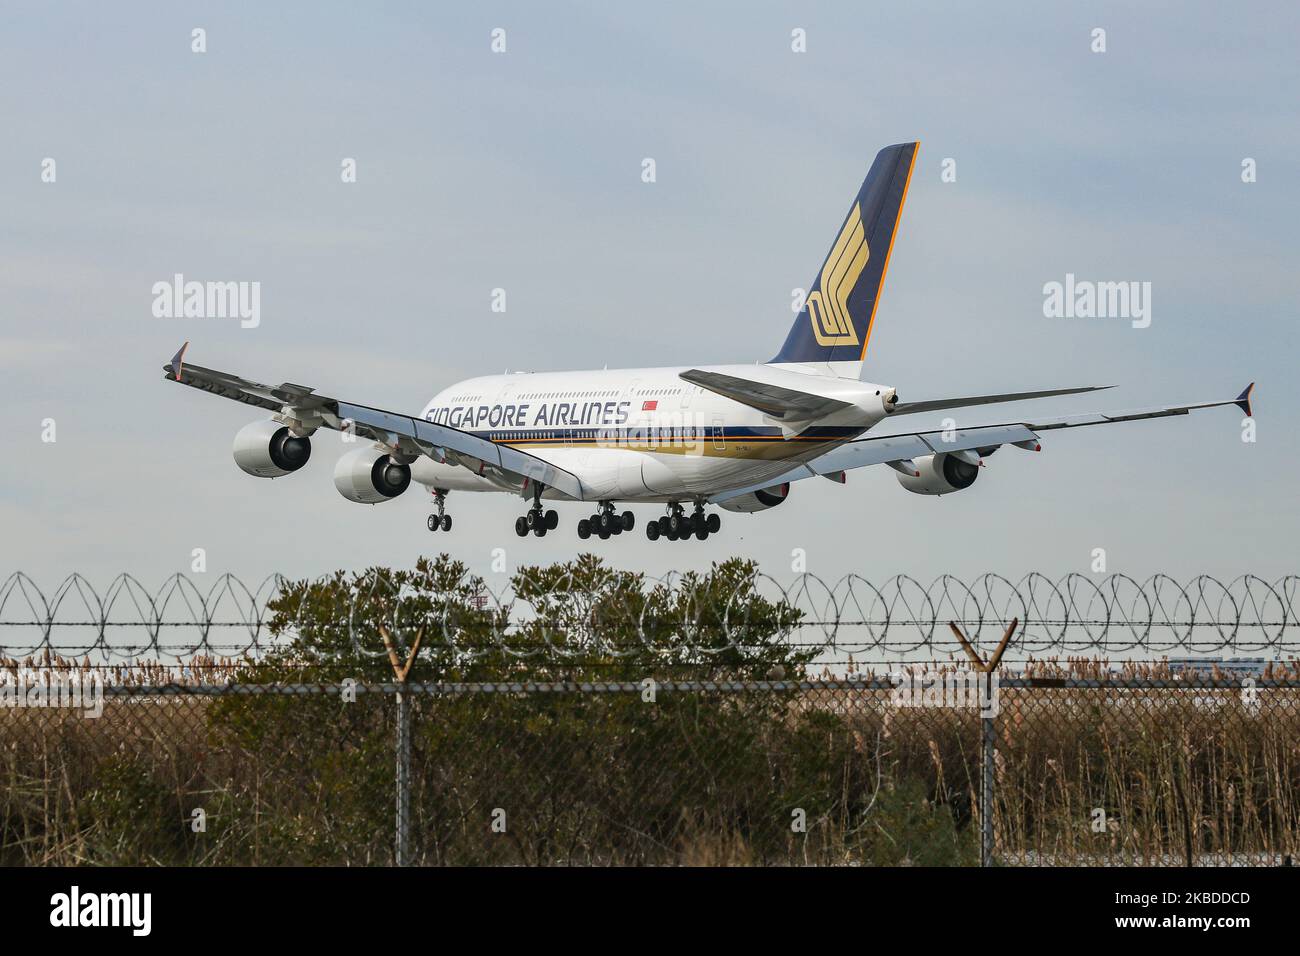 Singapore Airlines Airbus A380, specifically A380-841 aircraft as seen on final approach landing at New York JFK, John F. Kennedy International Airport on 14 November 2019. The wide-body, double-decker long haul airplane has the registration 9V-SKJ and is powered by 4x RR ( Rolls Royce ) jet engines. Singapore SQ, SIA is the flag carrier airline of Singapore, with a base in its hub Changi Airport SIN WSSS, a member of Star Alliance aviation alliance. The airline has been awarded by Skytrax as Best Airline of the World. (Photo by Nicolas Economou/NurPhoto) Stock Photo